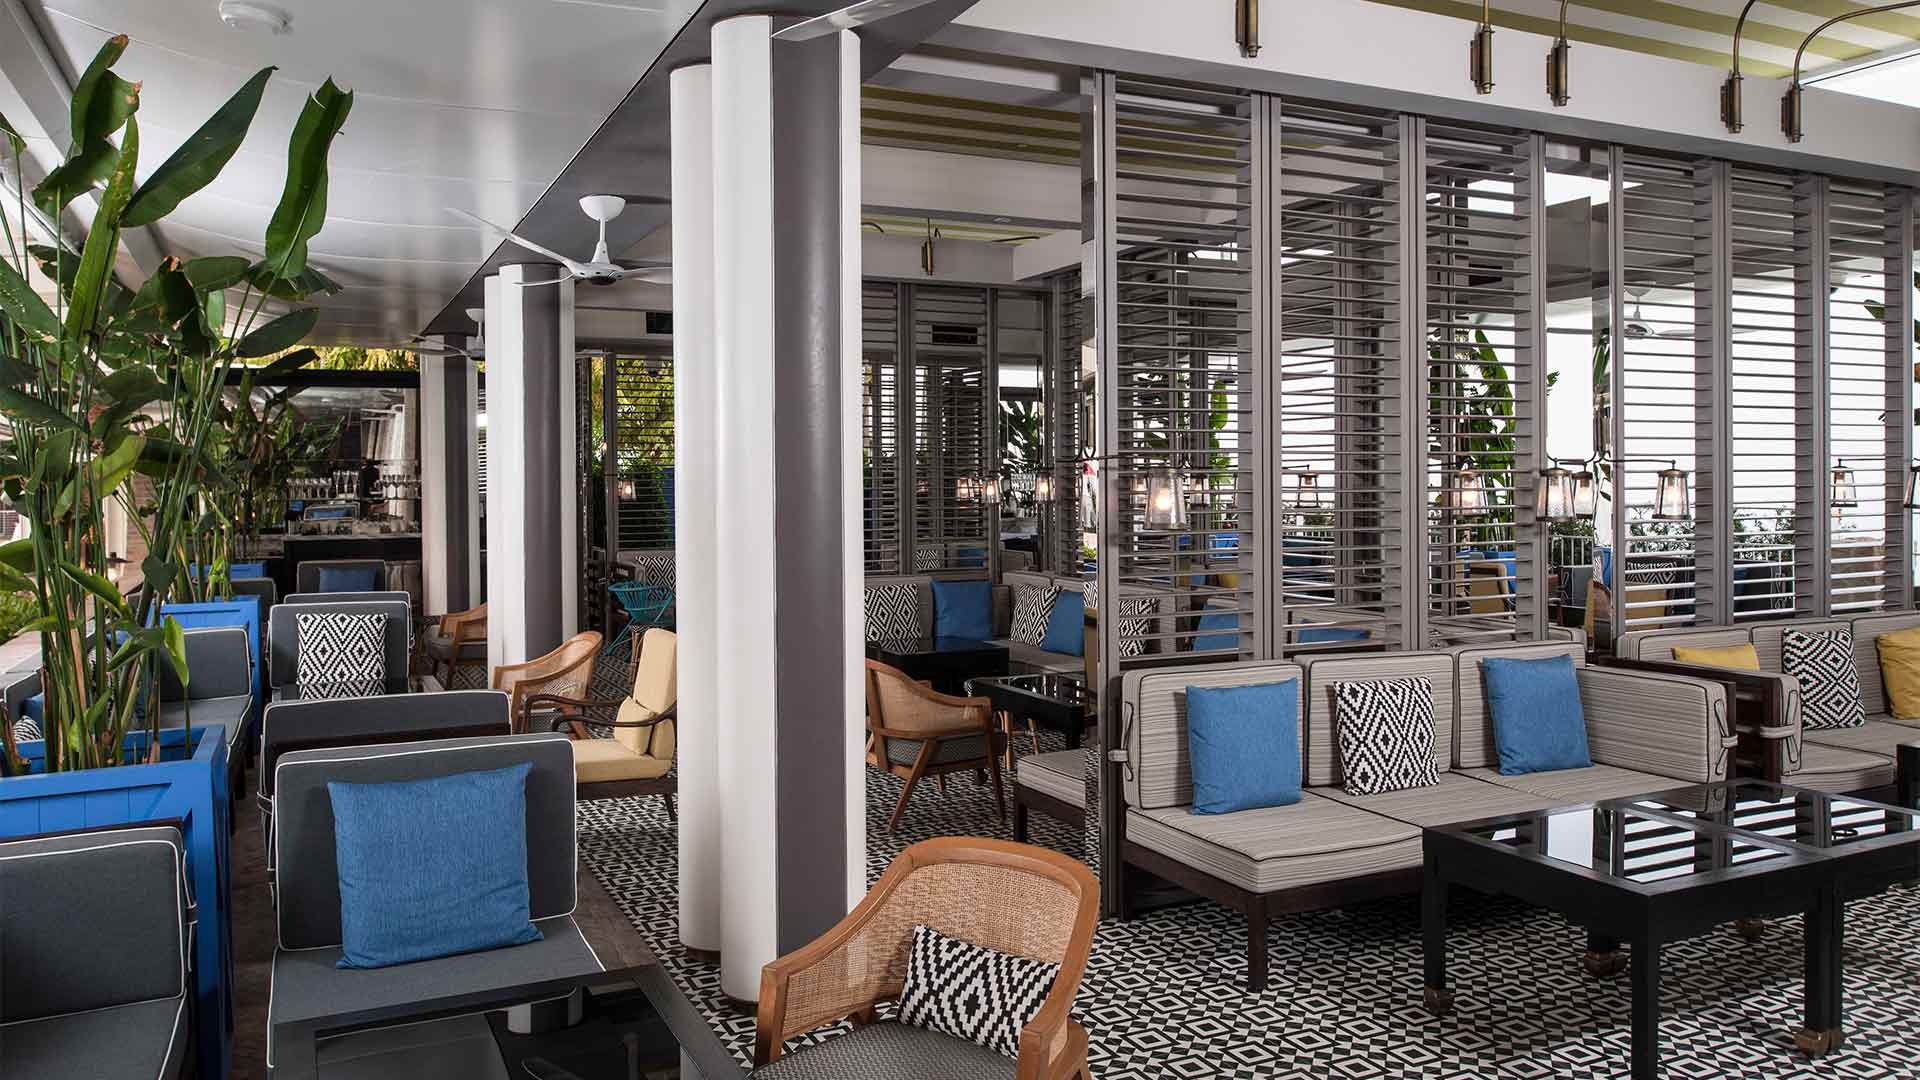 Terrace dining area of Spago Bar & Lounge, where private dining events are held